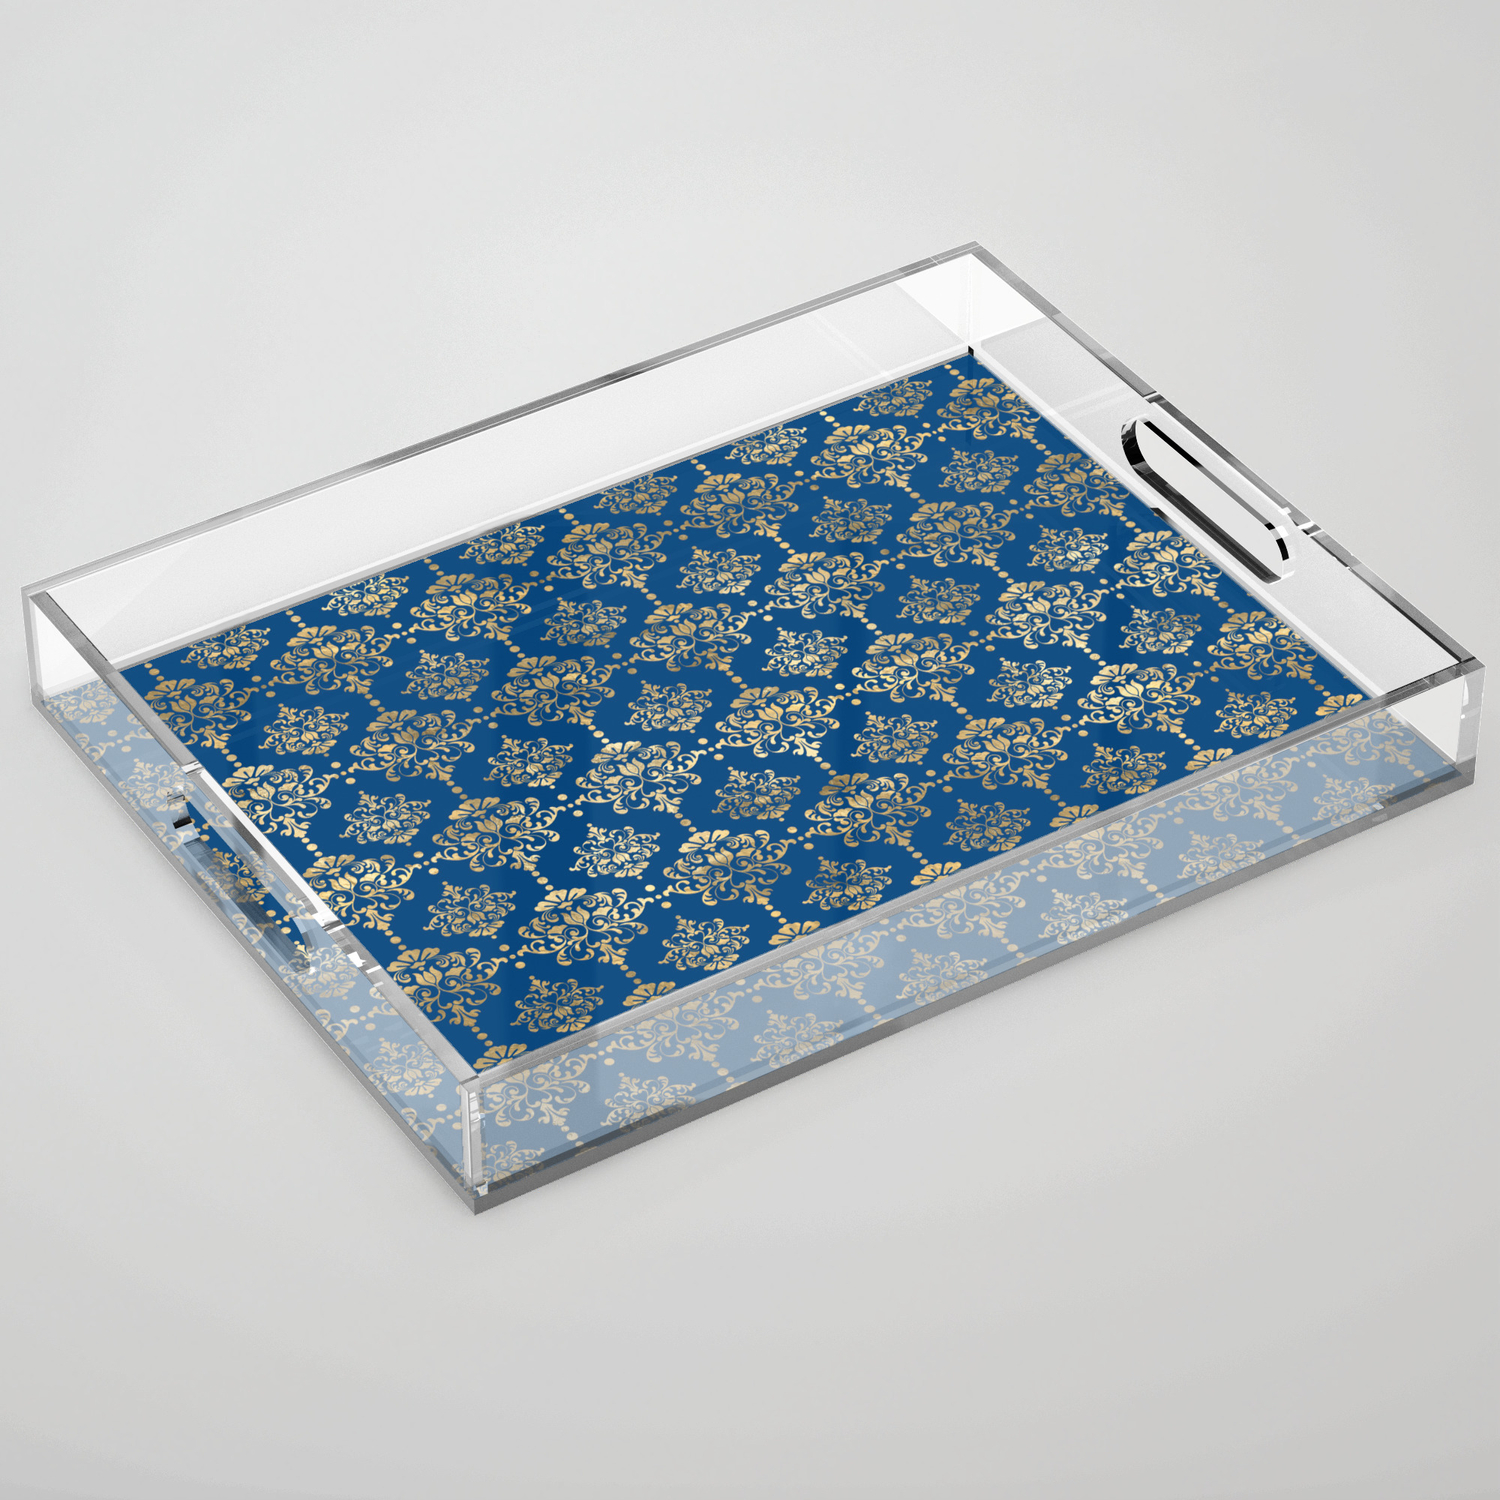 Damask Pattern Serving Acrylic Tray Decorative Tray For Kitchen Table 